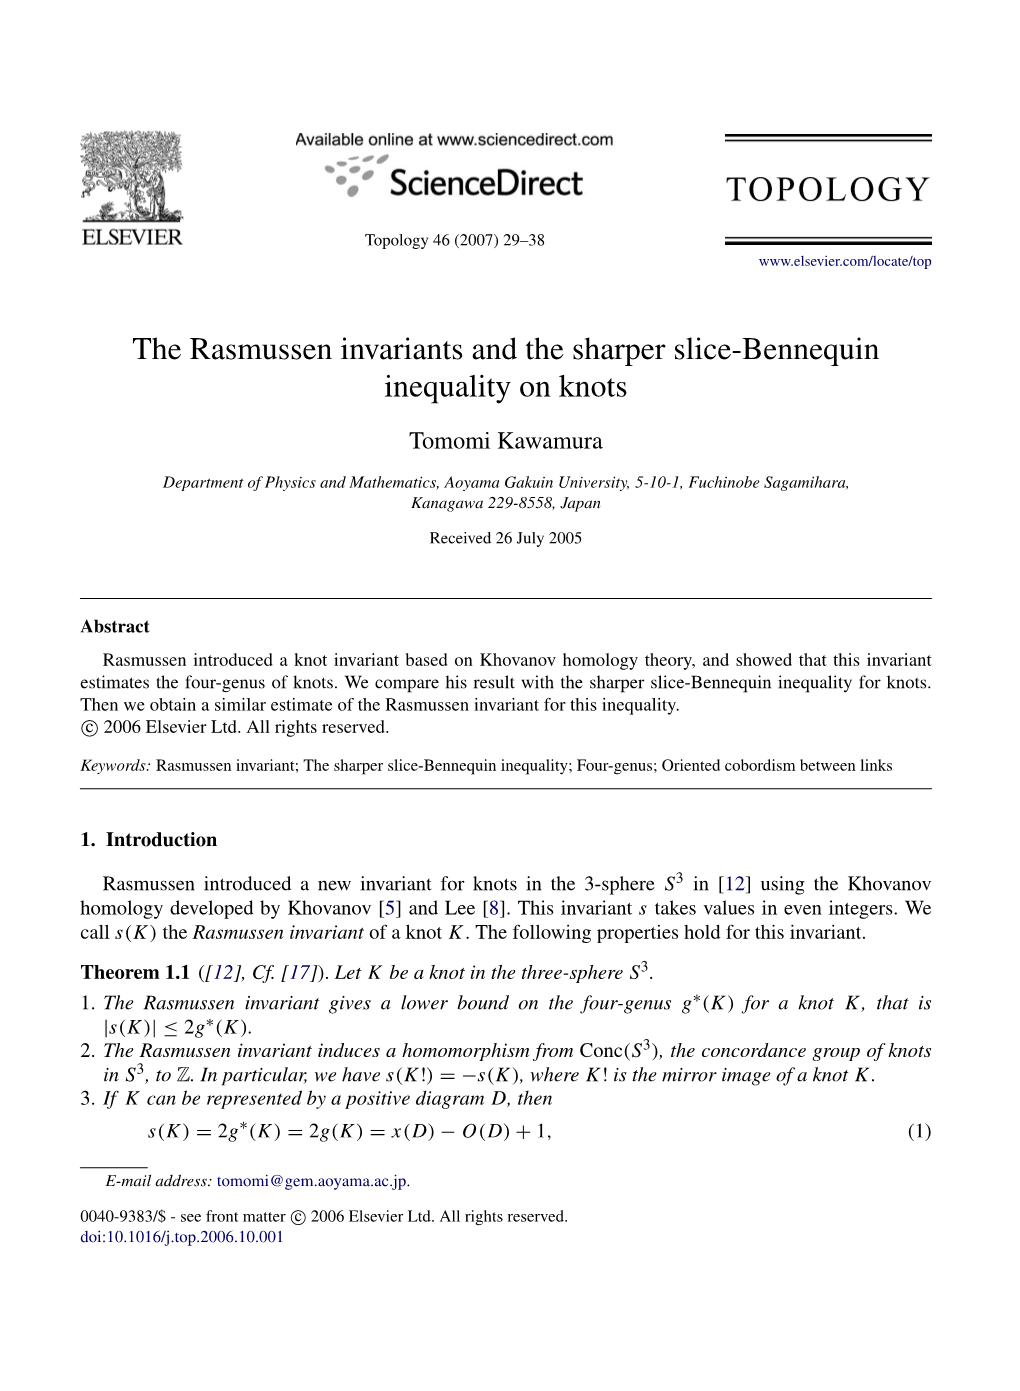 The Rasmussen Invariants and the Sharper Slice-Bennequin Inequality on Knots